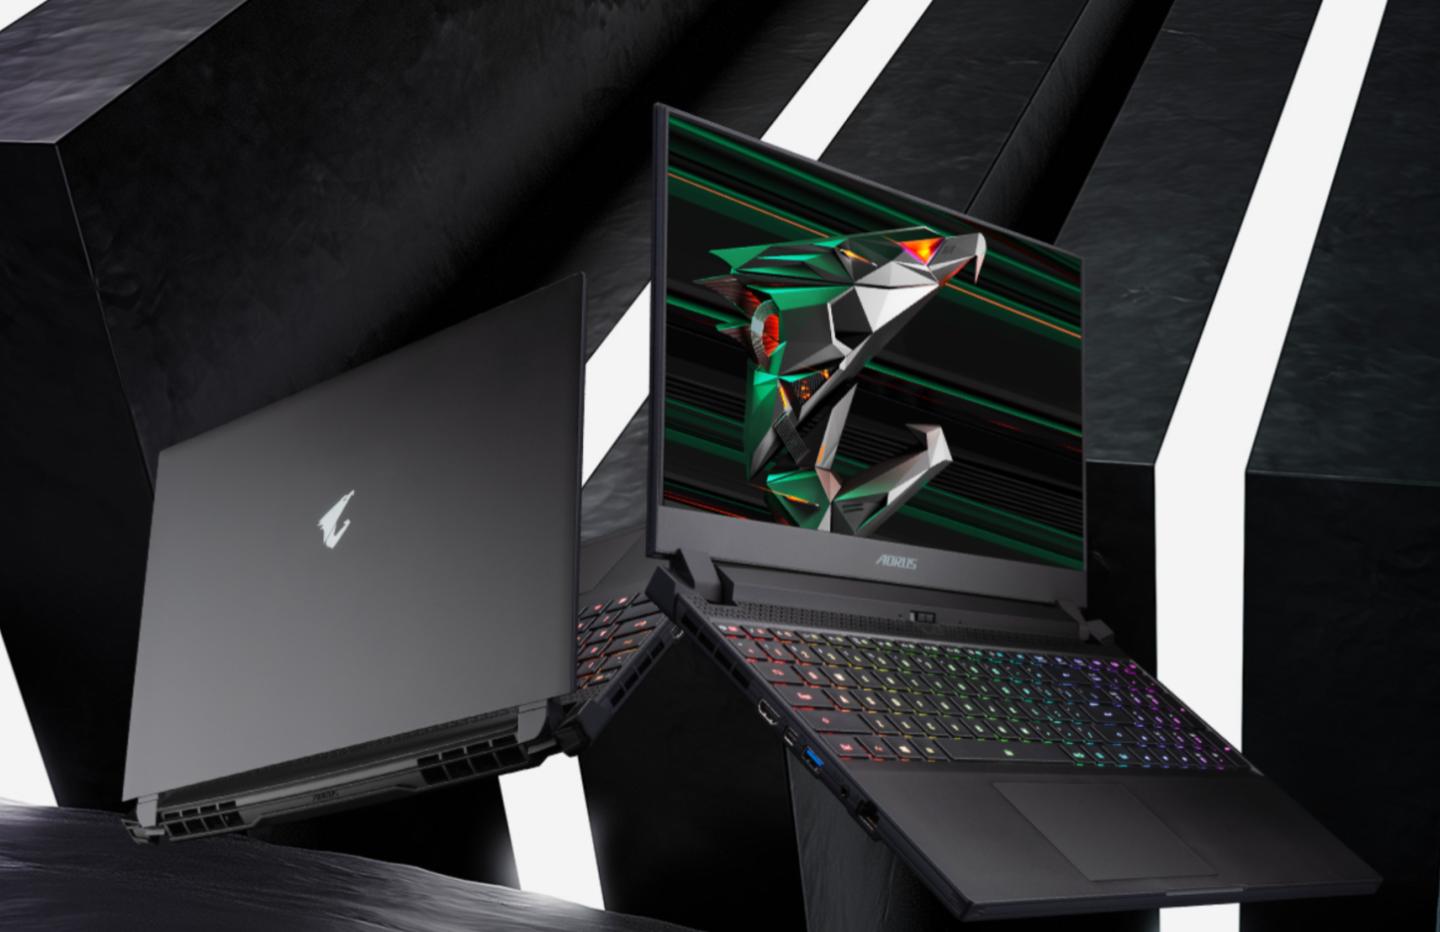 This gaming laptop with RTX 3070 + i7 + 1TB SSD + 16GB RAM is 1000 euros less than at launch.